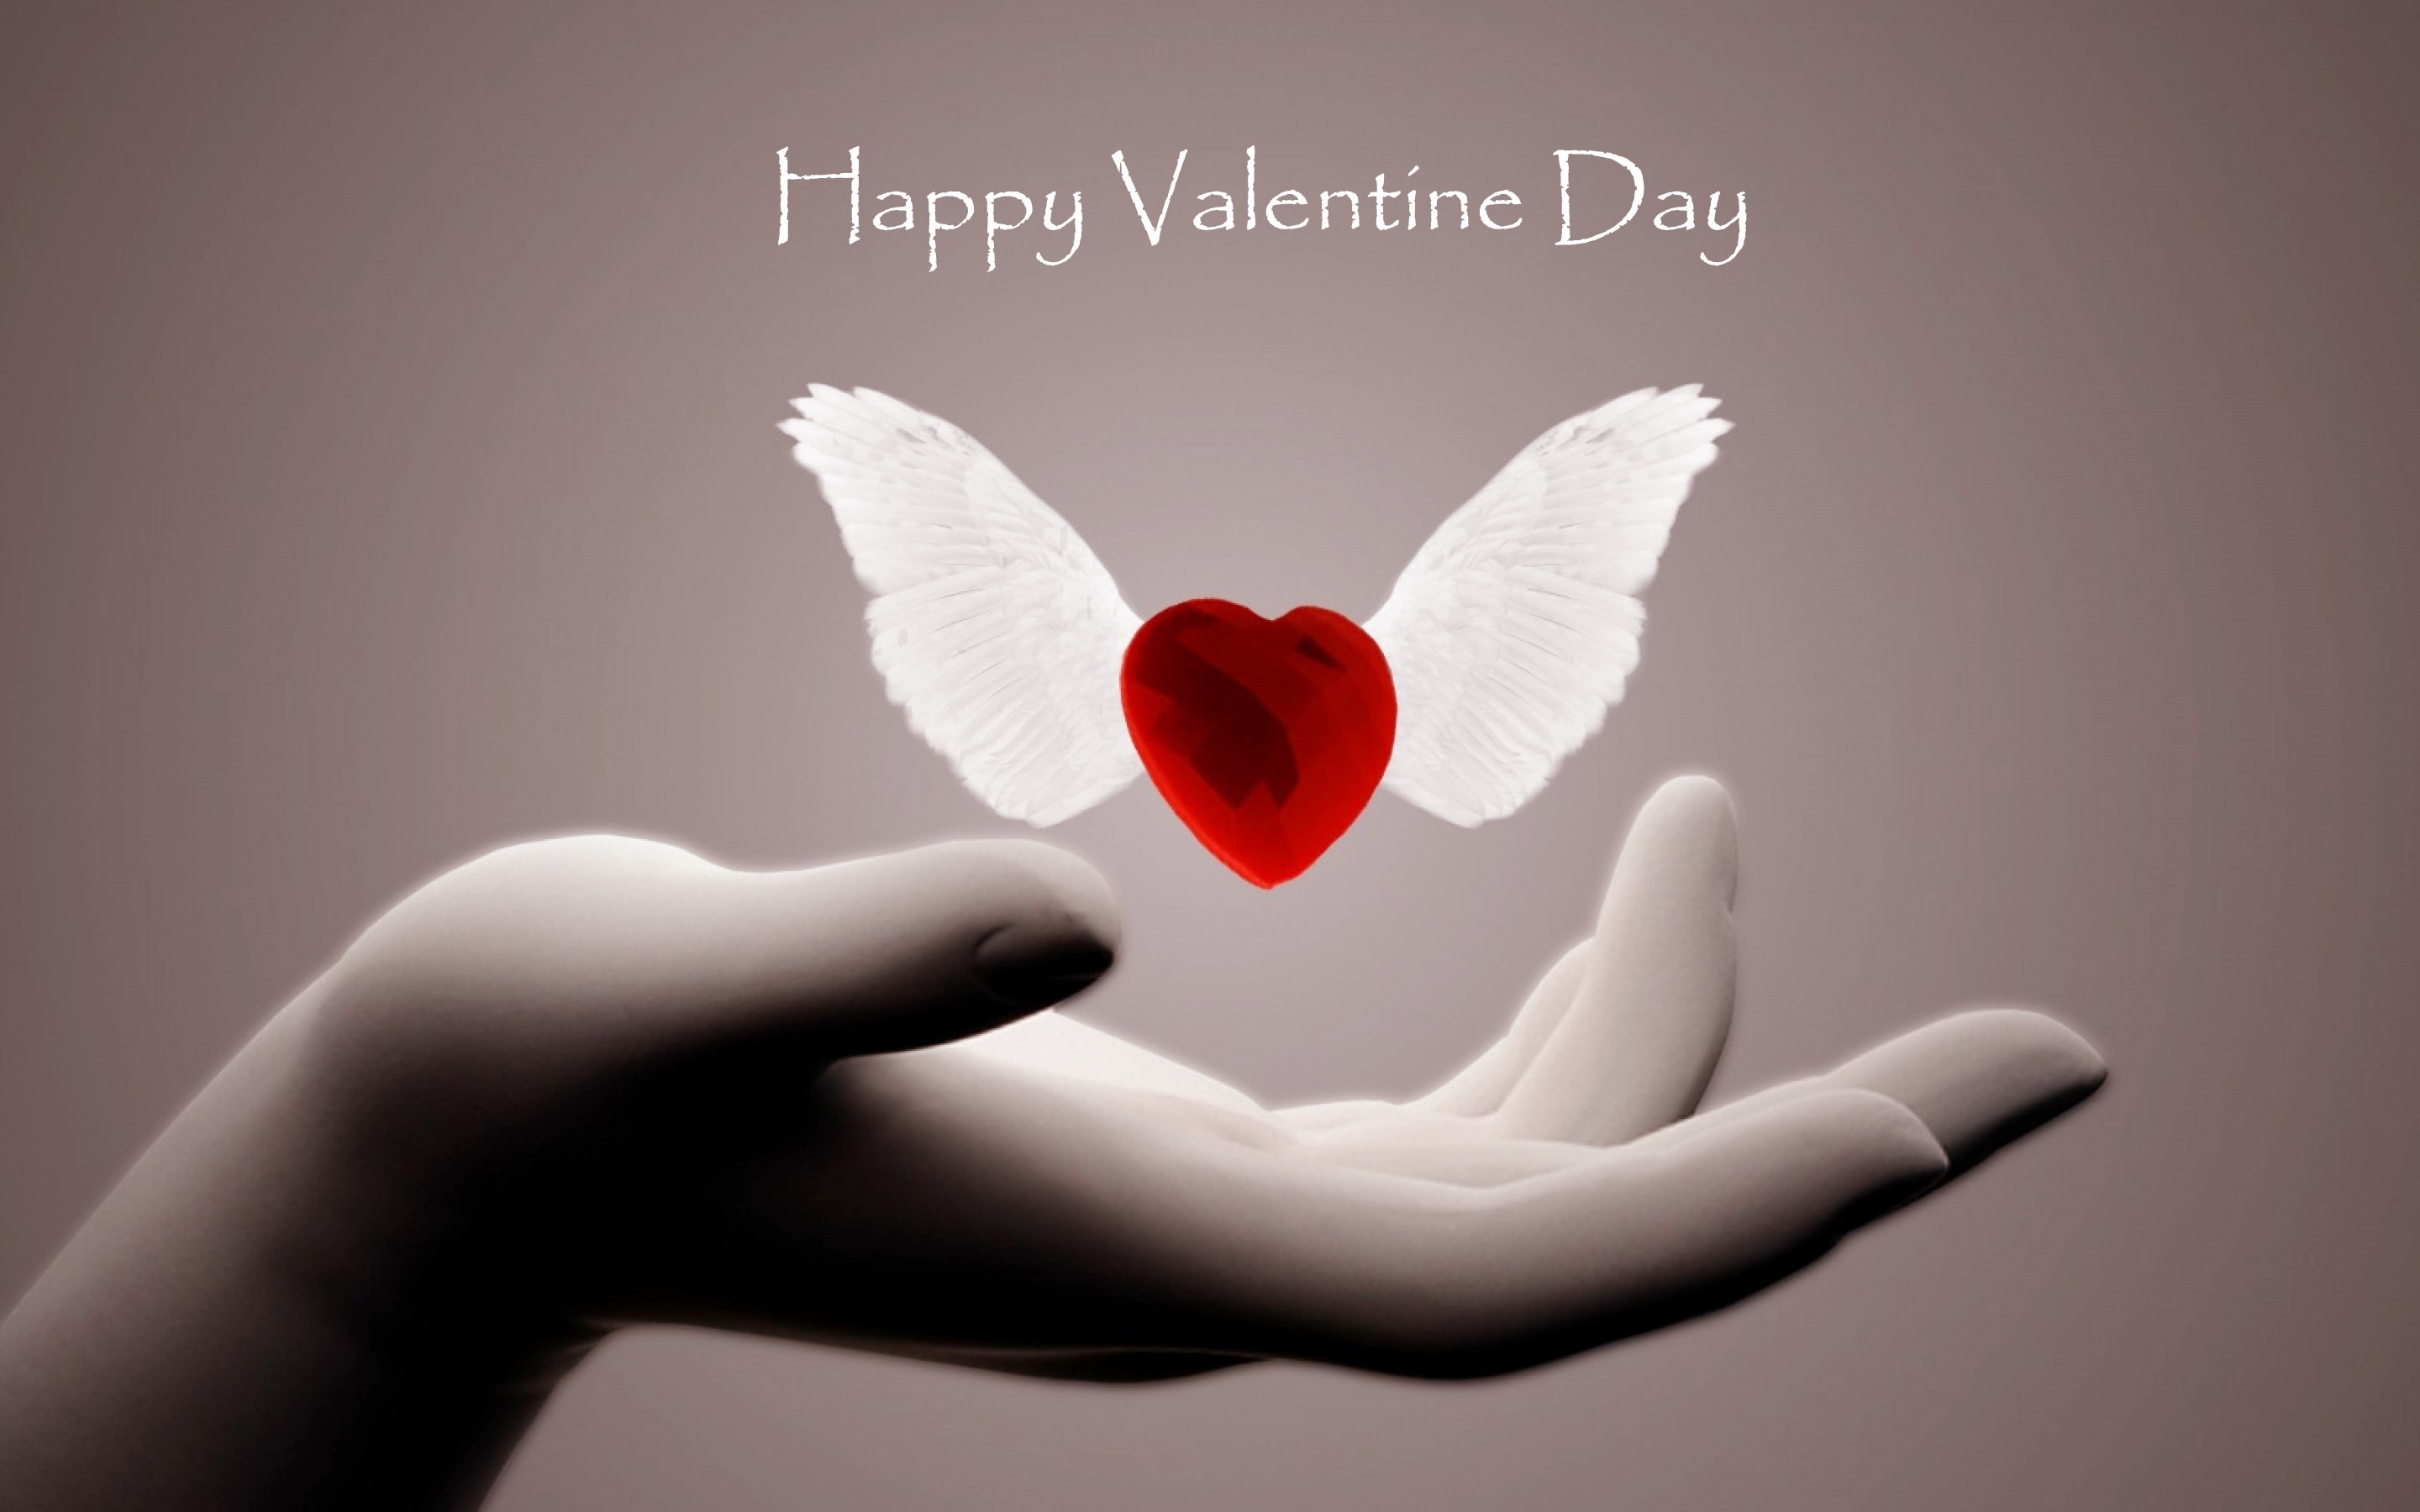 Valentine Day Images Hd - 2880x1800 Wallpaper 